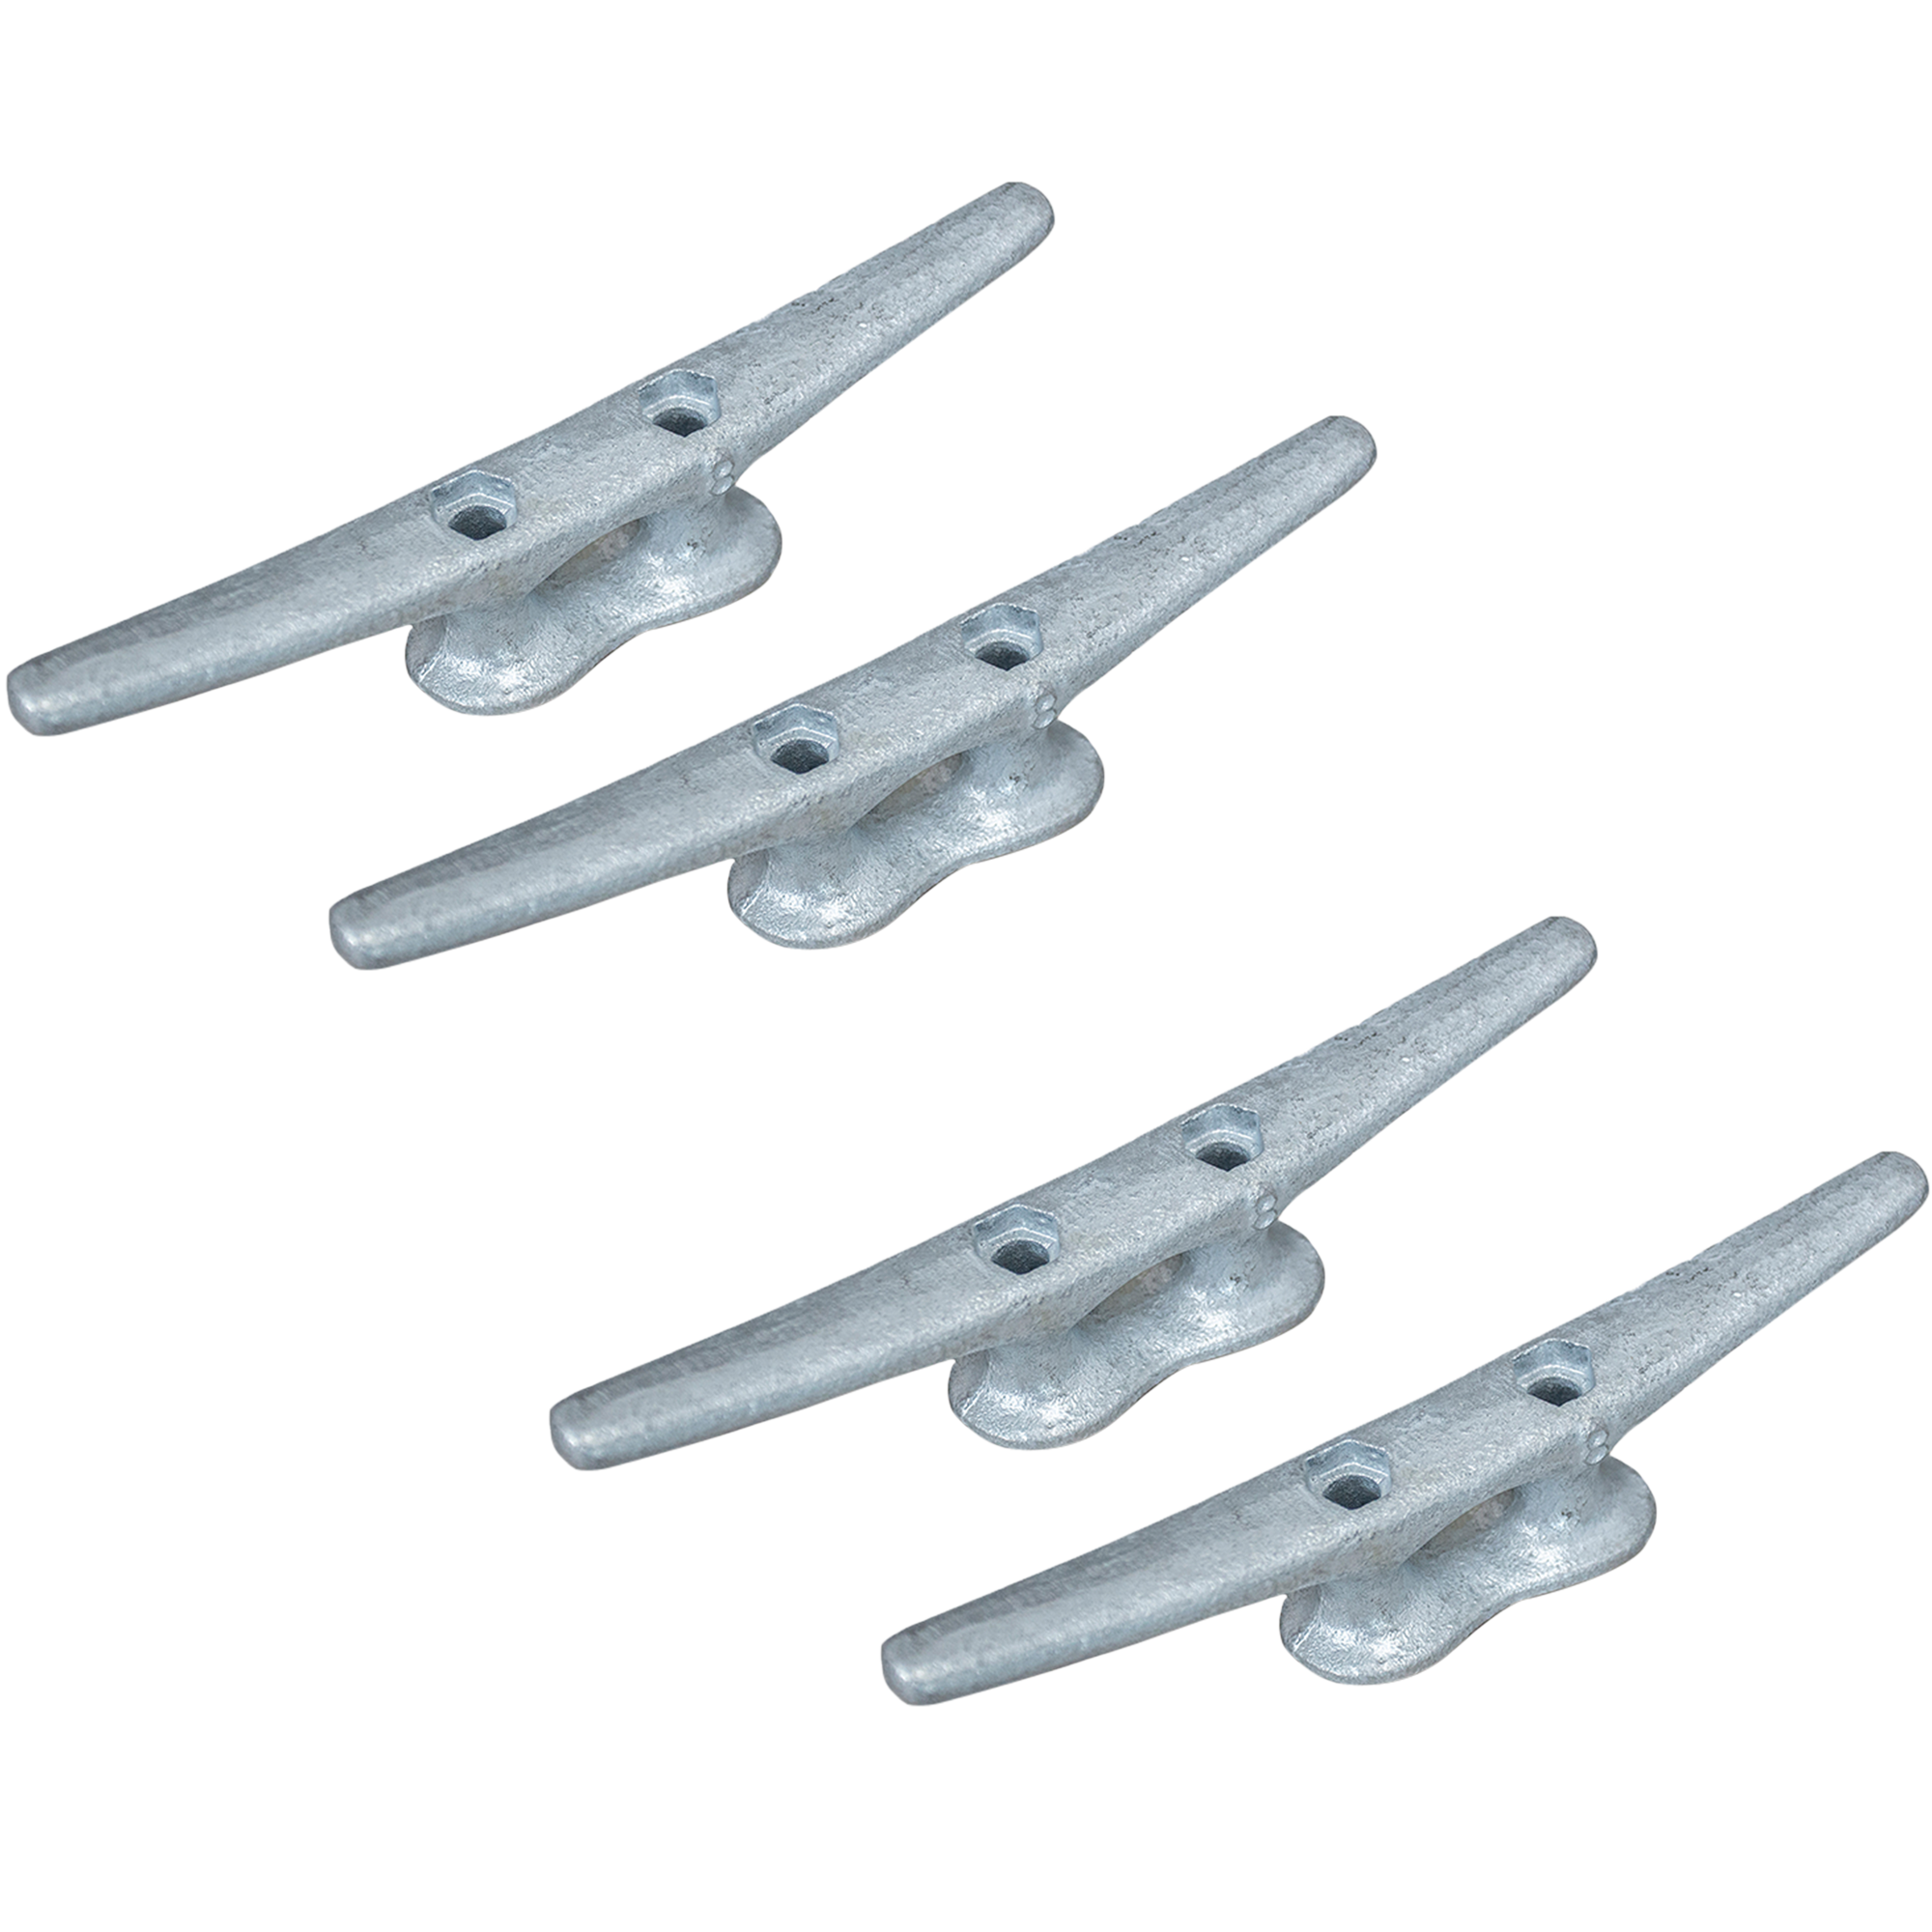 8" Dock Cleat 4-Pack